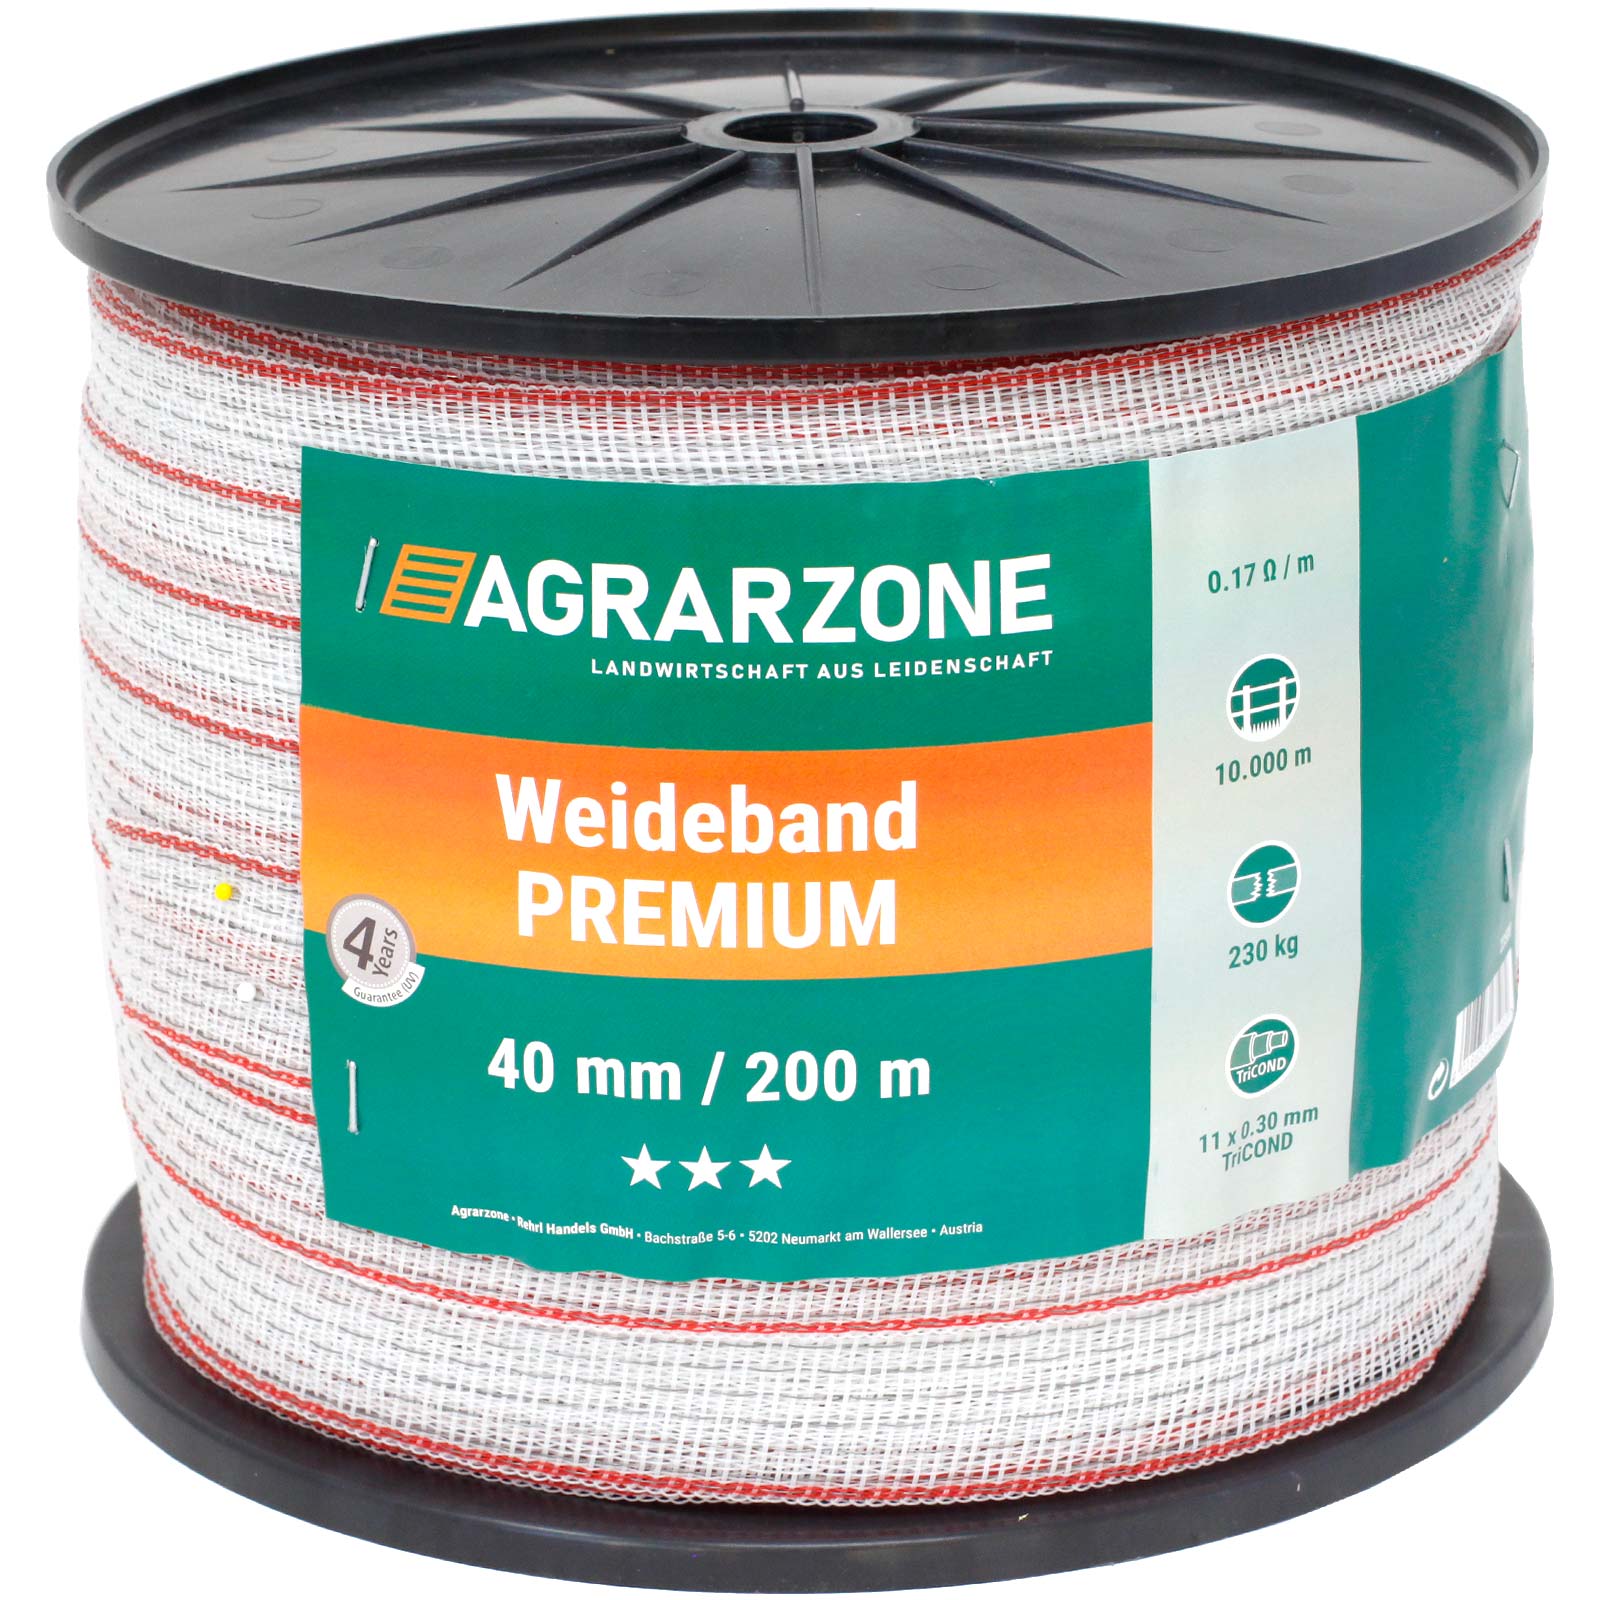 Agrarzone Pasture Fence Tape Premium 0.30 TriCOND, white-red 200 m x 40 mm